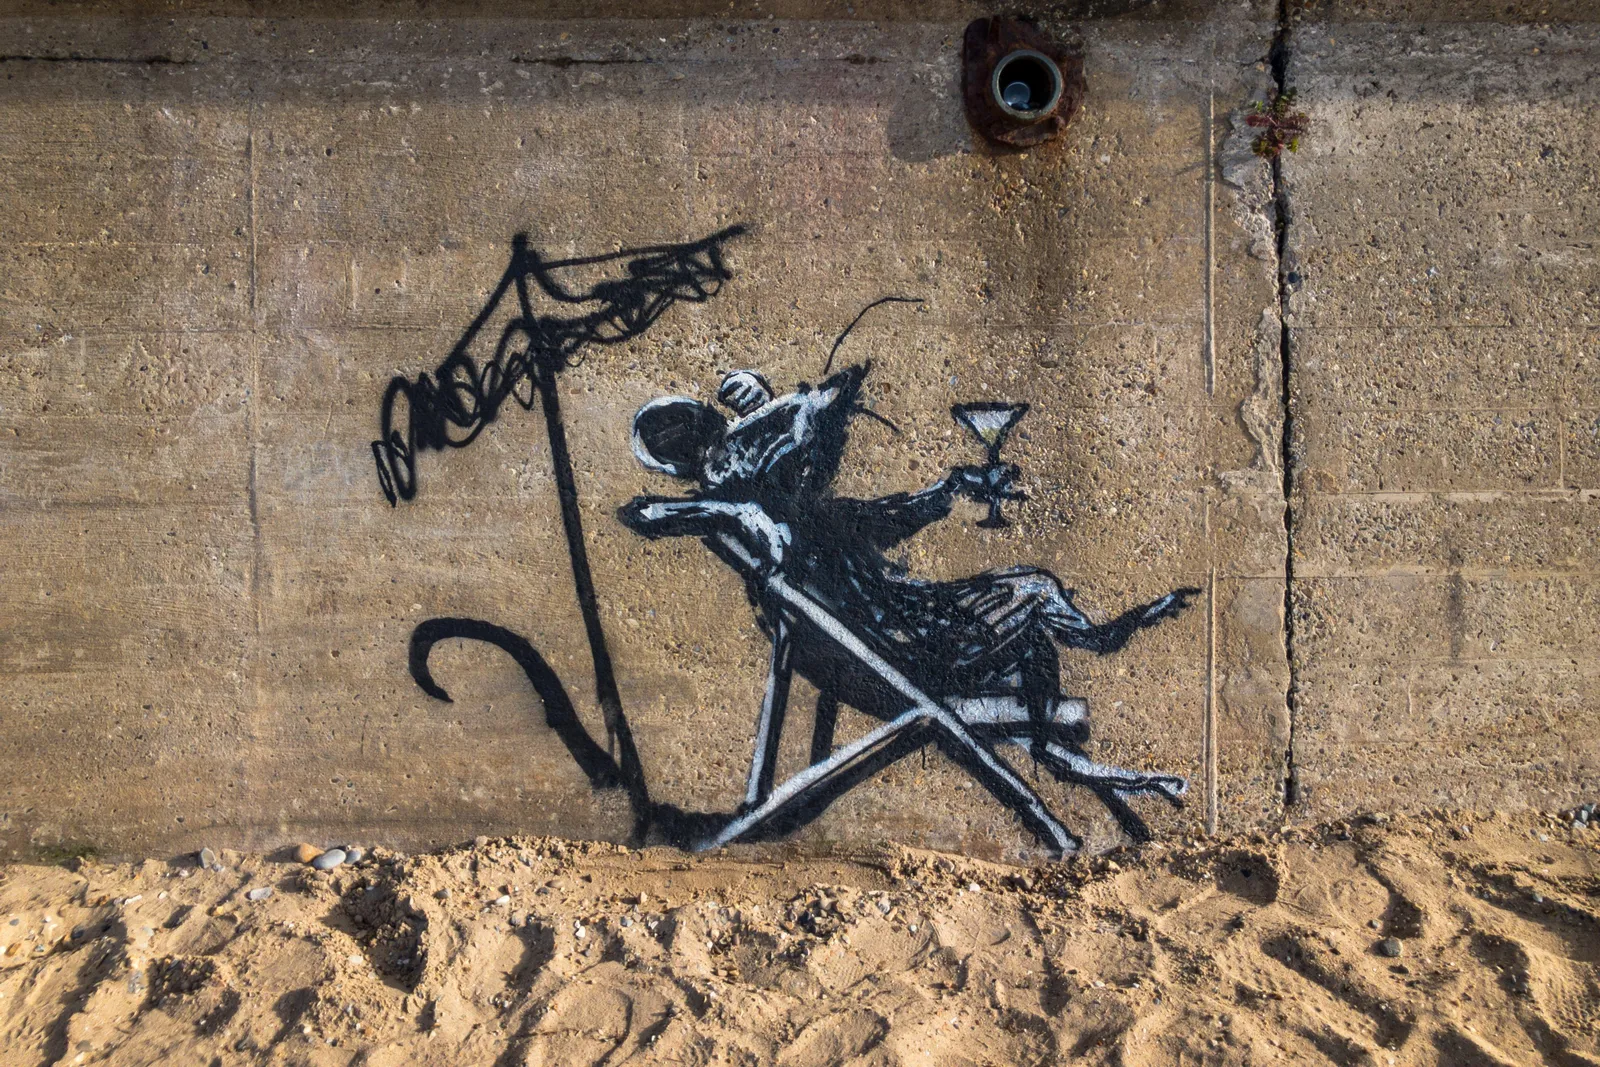 Banksy Murals in England Defaced, Removed Just Days After Appearing, Smart  News